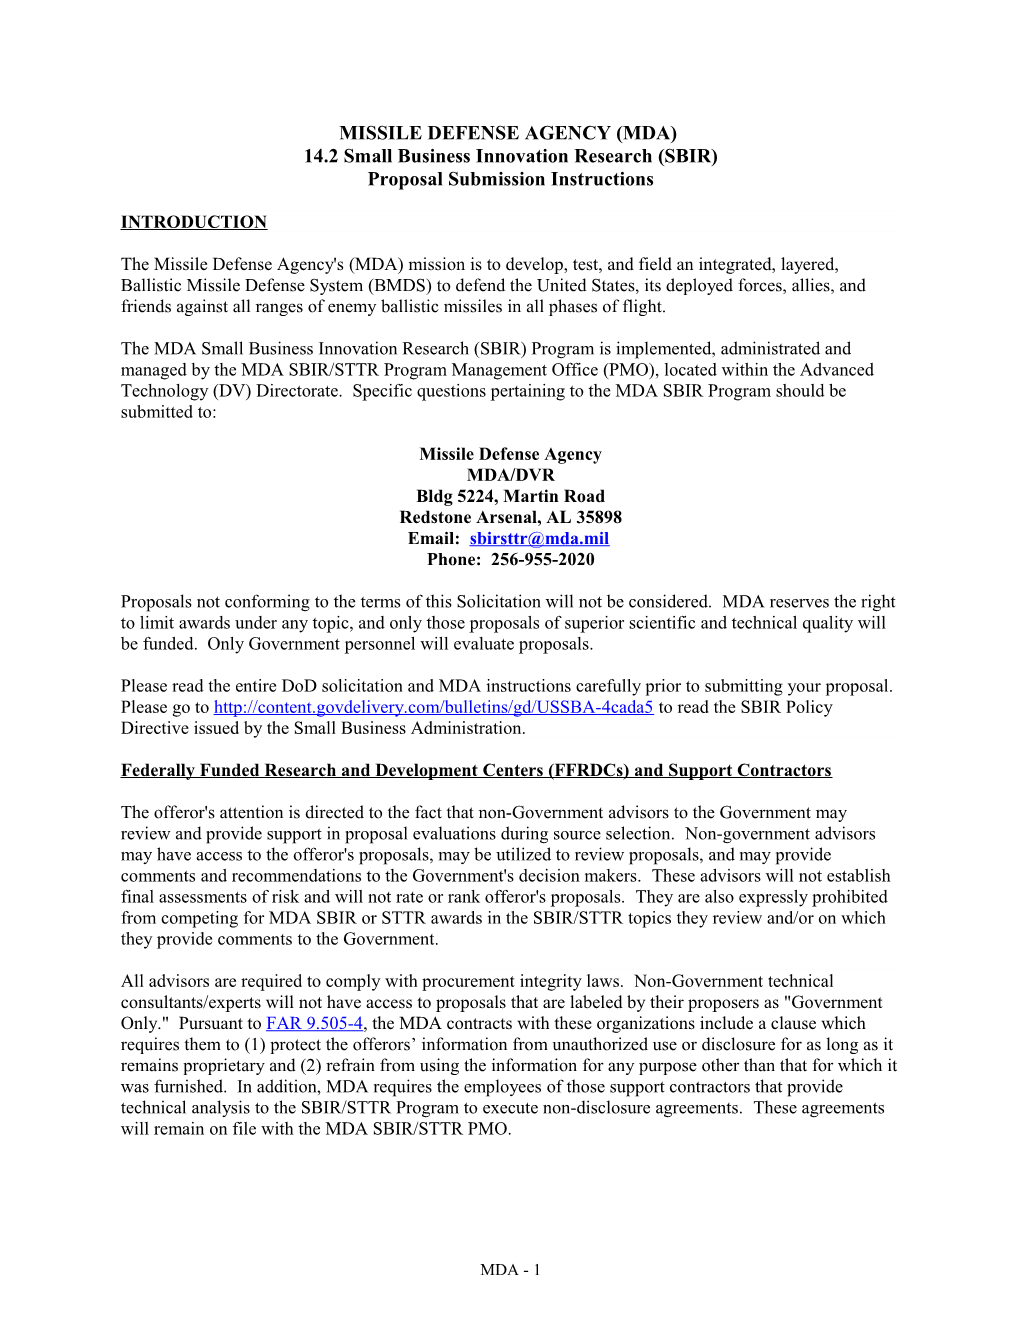 MISSILE DEFENSE AGENCY (MDA) 14.2 Small Business Innovation Research (SBIR) Proposal Submission